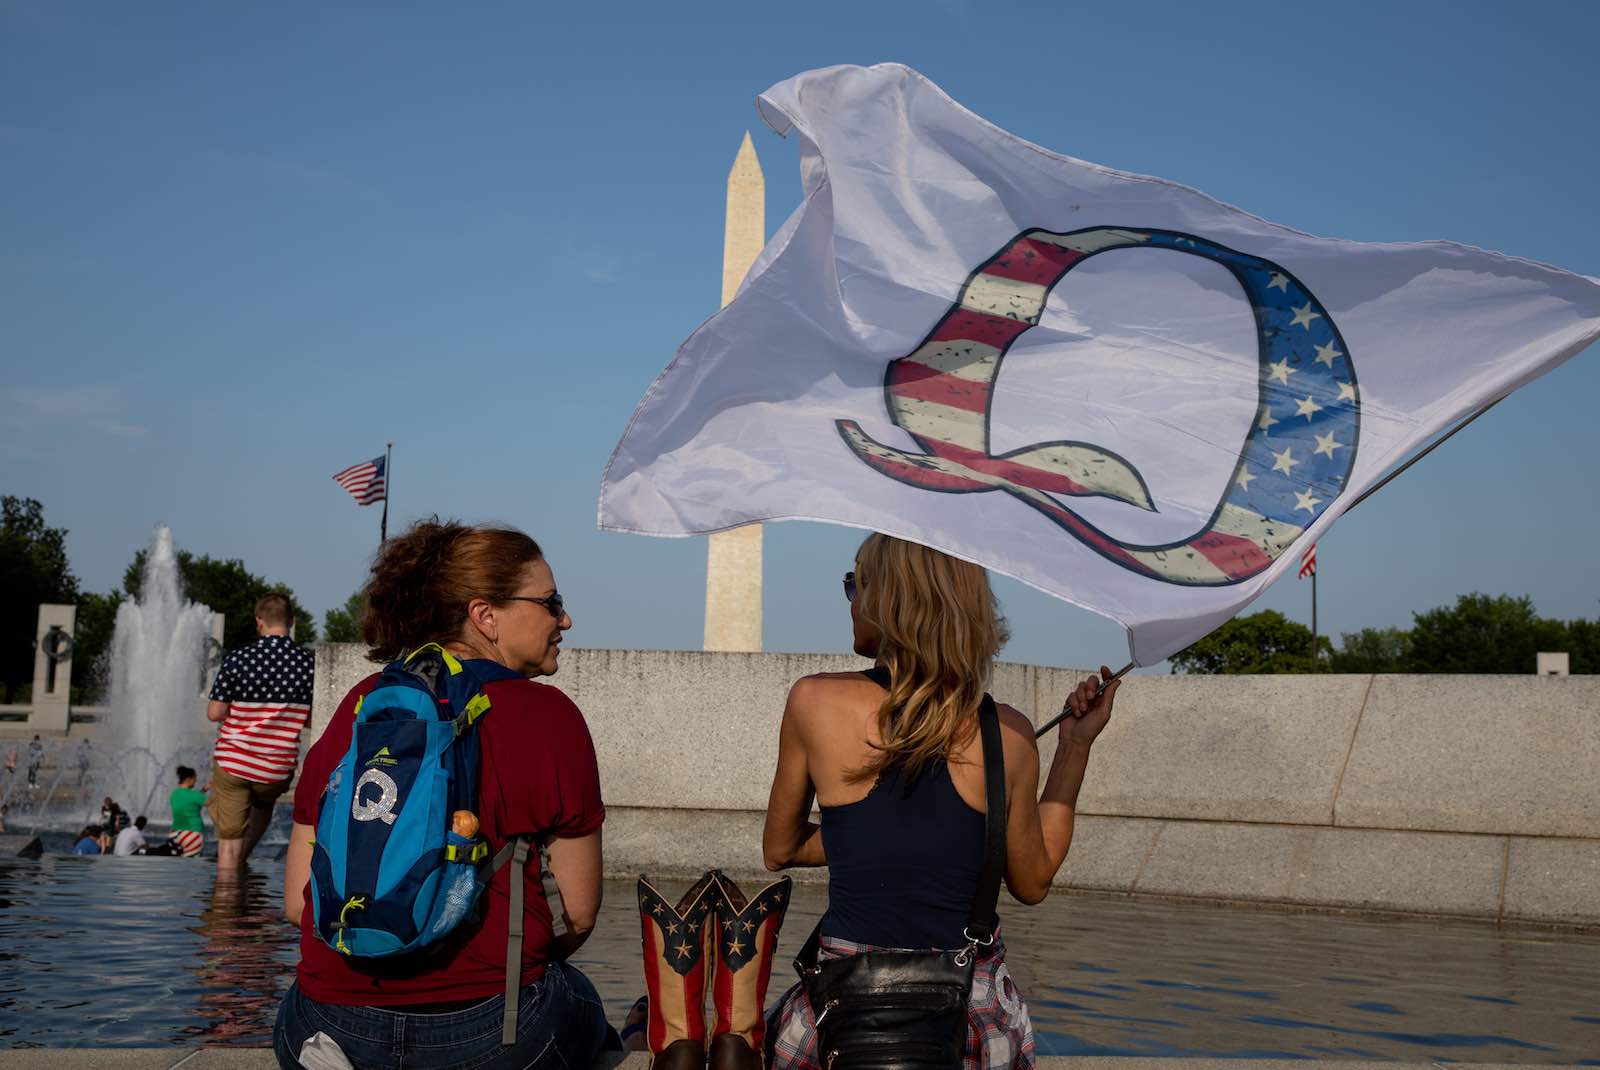 “QAnon” supporters during Independence Day celebrations in Washington, DC (Evelyn Hockstein/Washington Post via Getty Images)